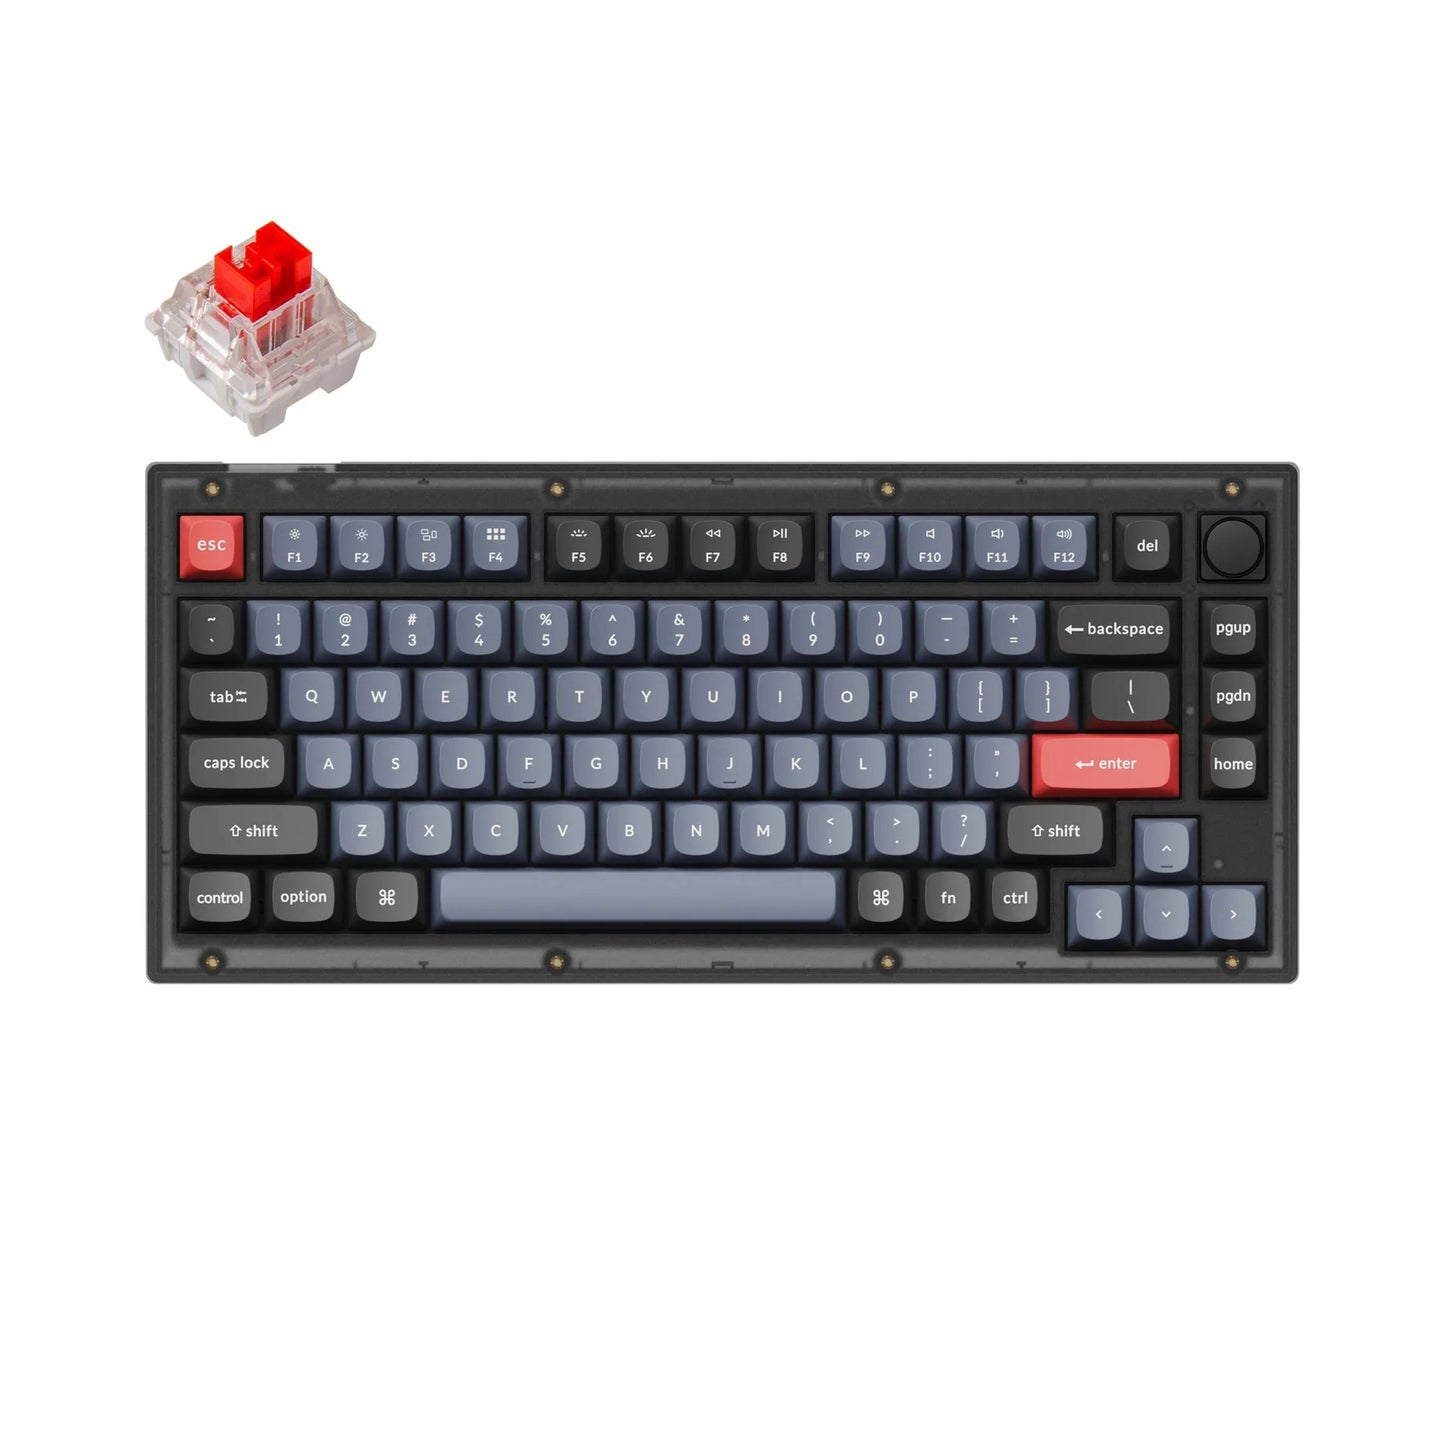 Keychron V1 QMK 84 Keys Compact Wired TKL Tenkeyless Mechanical Keyboard with Hot-Swappable Switches and RGB Backlight with Programmable Knob Version (Red Linear, Brown Tactile) (Frosted Black, Carbon Black) V1C1 V1C3